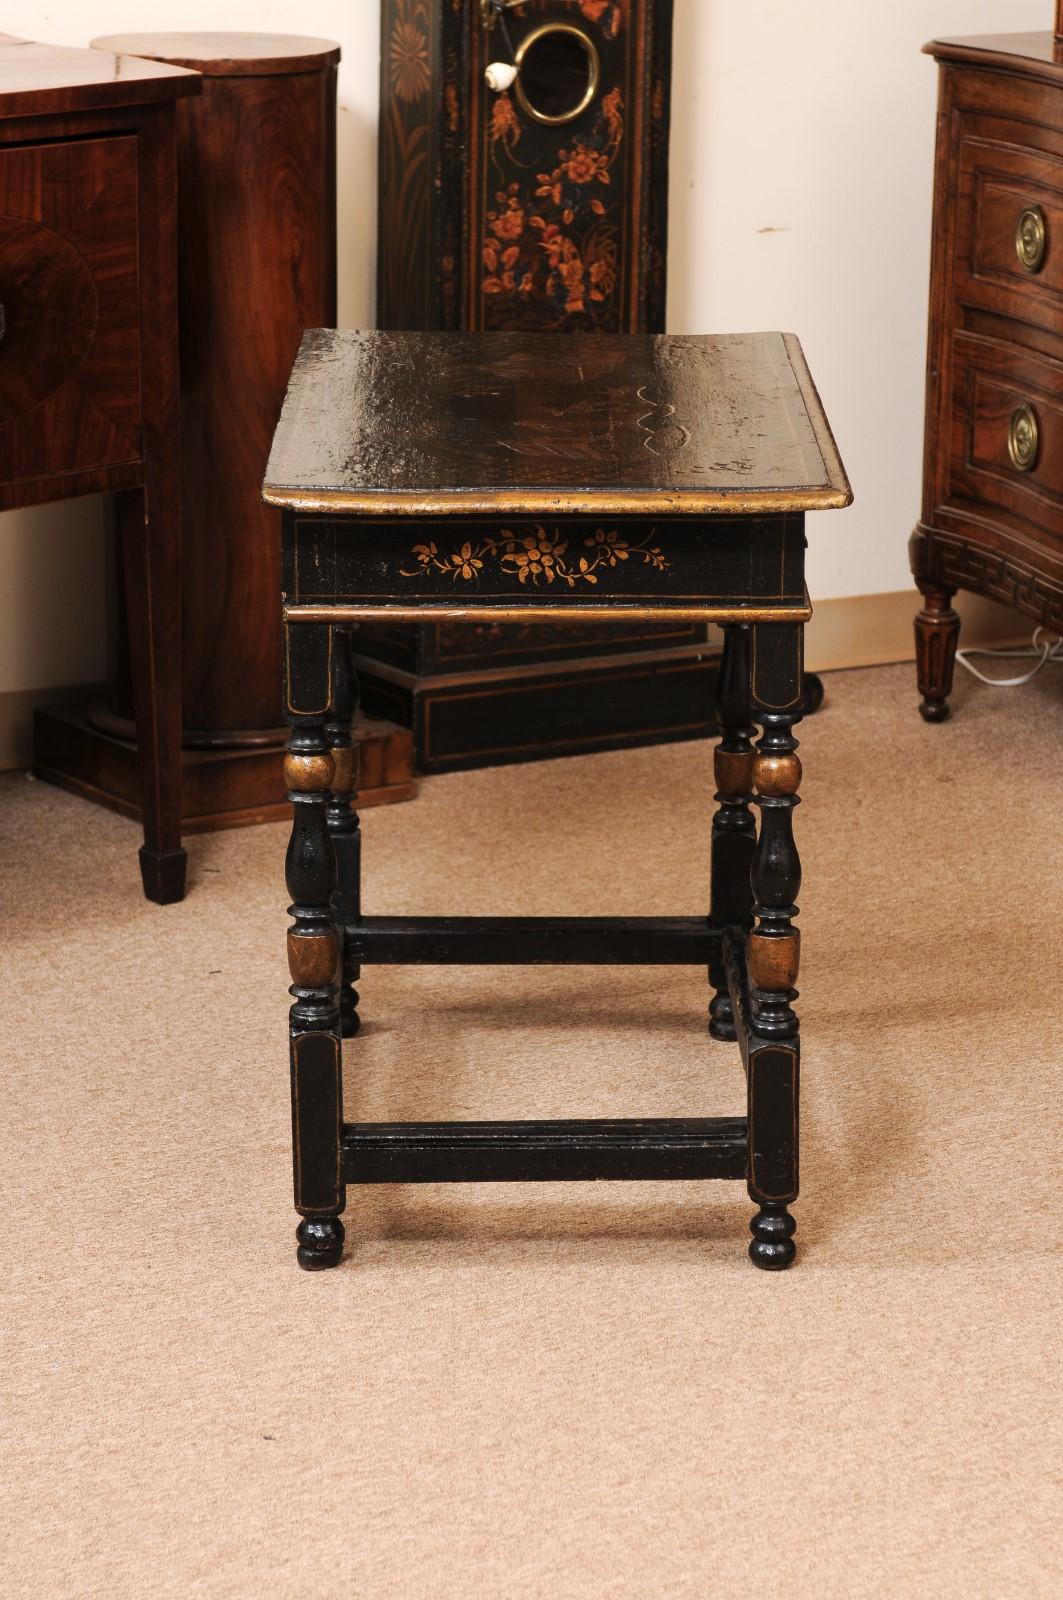 Wood 18th Century English Chinoiserie Decorated Side Table with Drawer, Turned Legs & For Sale